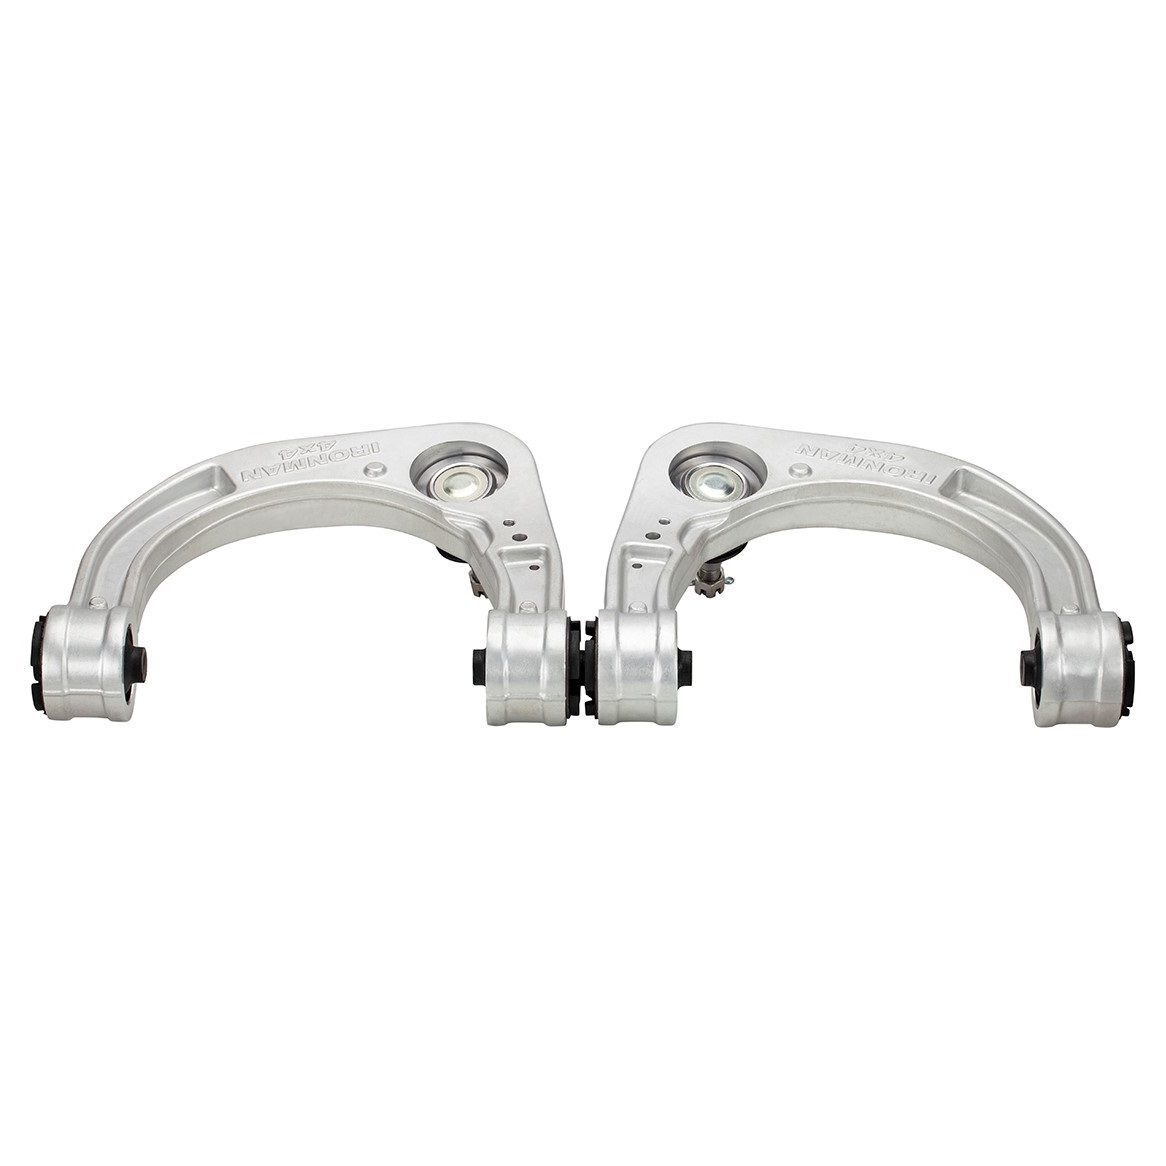 HILUX 2005+ UPPER CONTROL ARMS